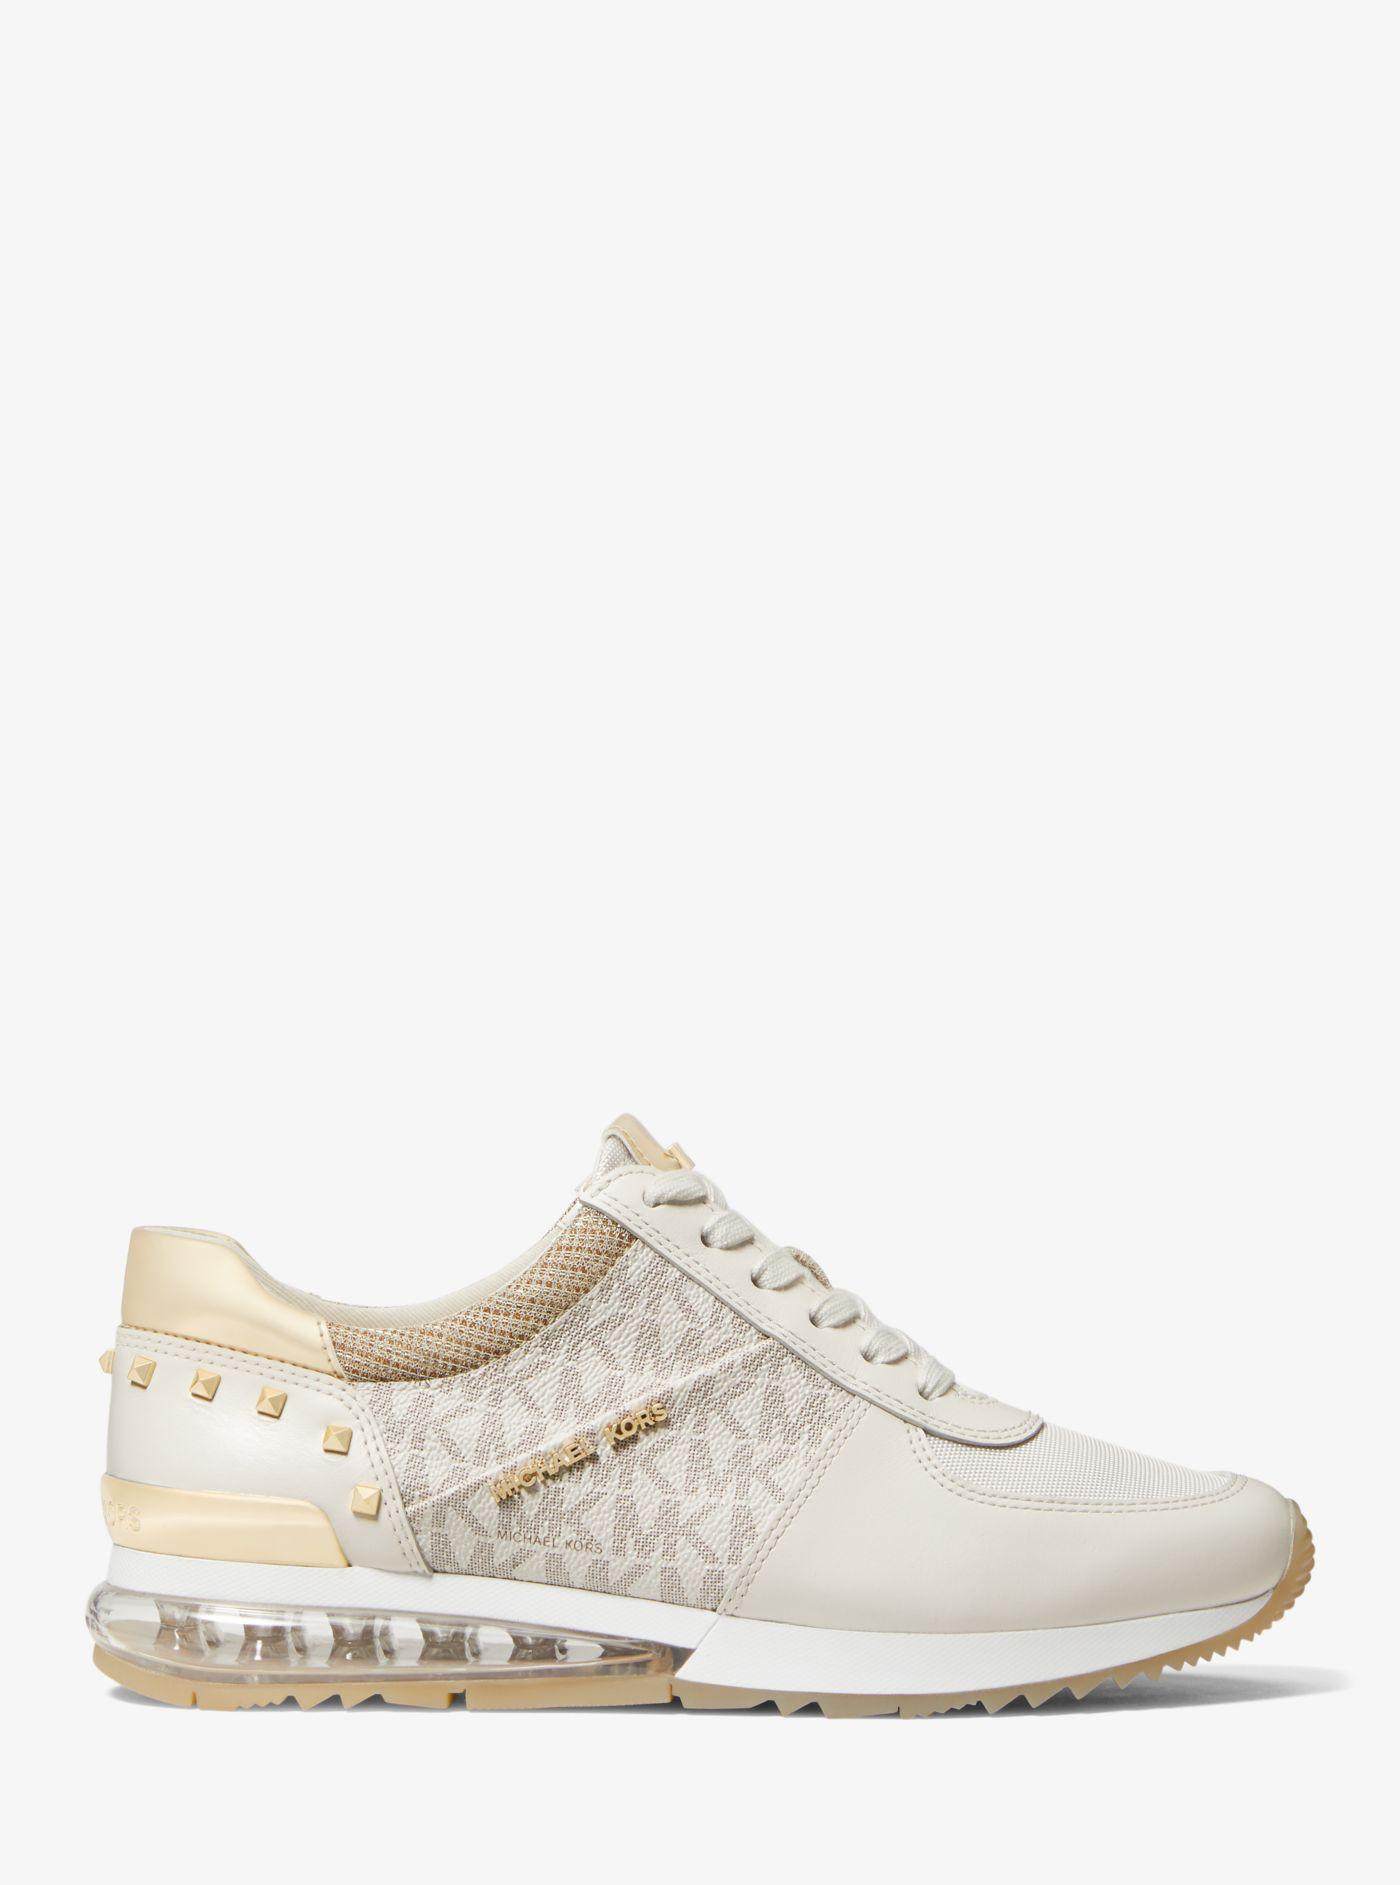 Michael Kors Allie Extreme Studded Mixed-media Trainer | Lyst Canada